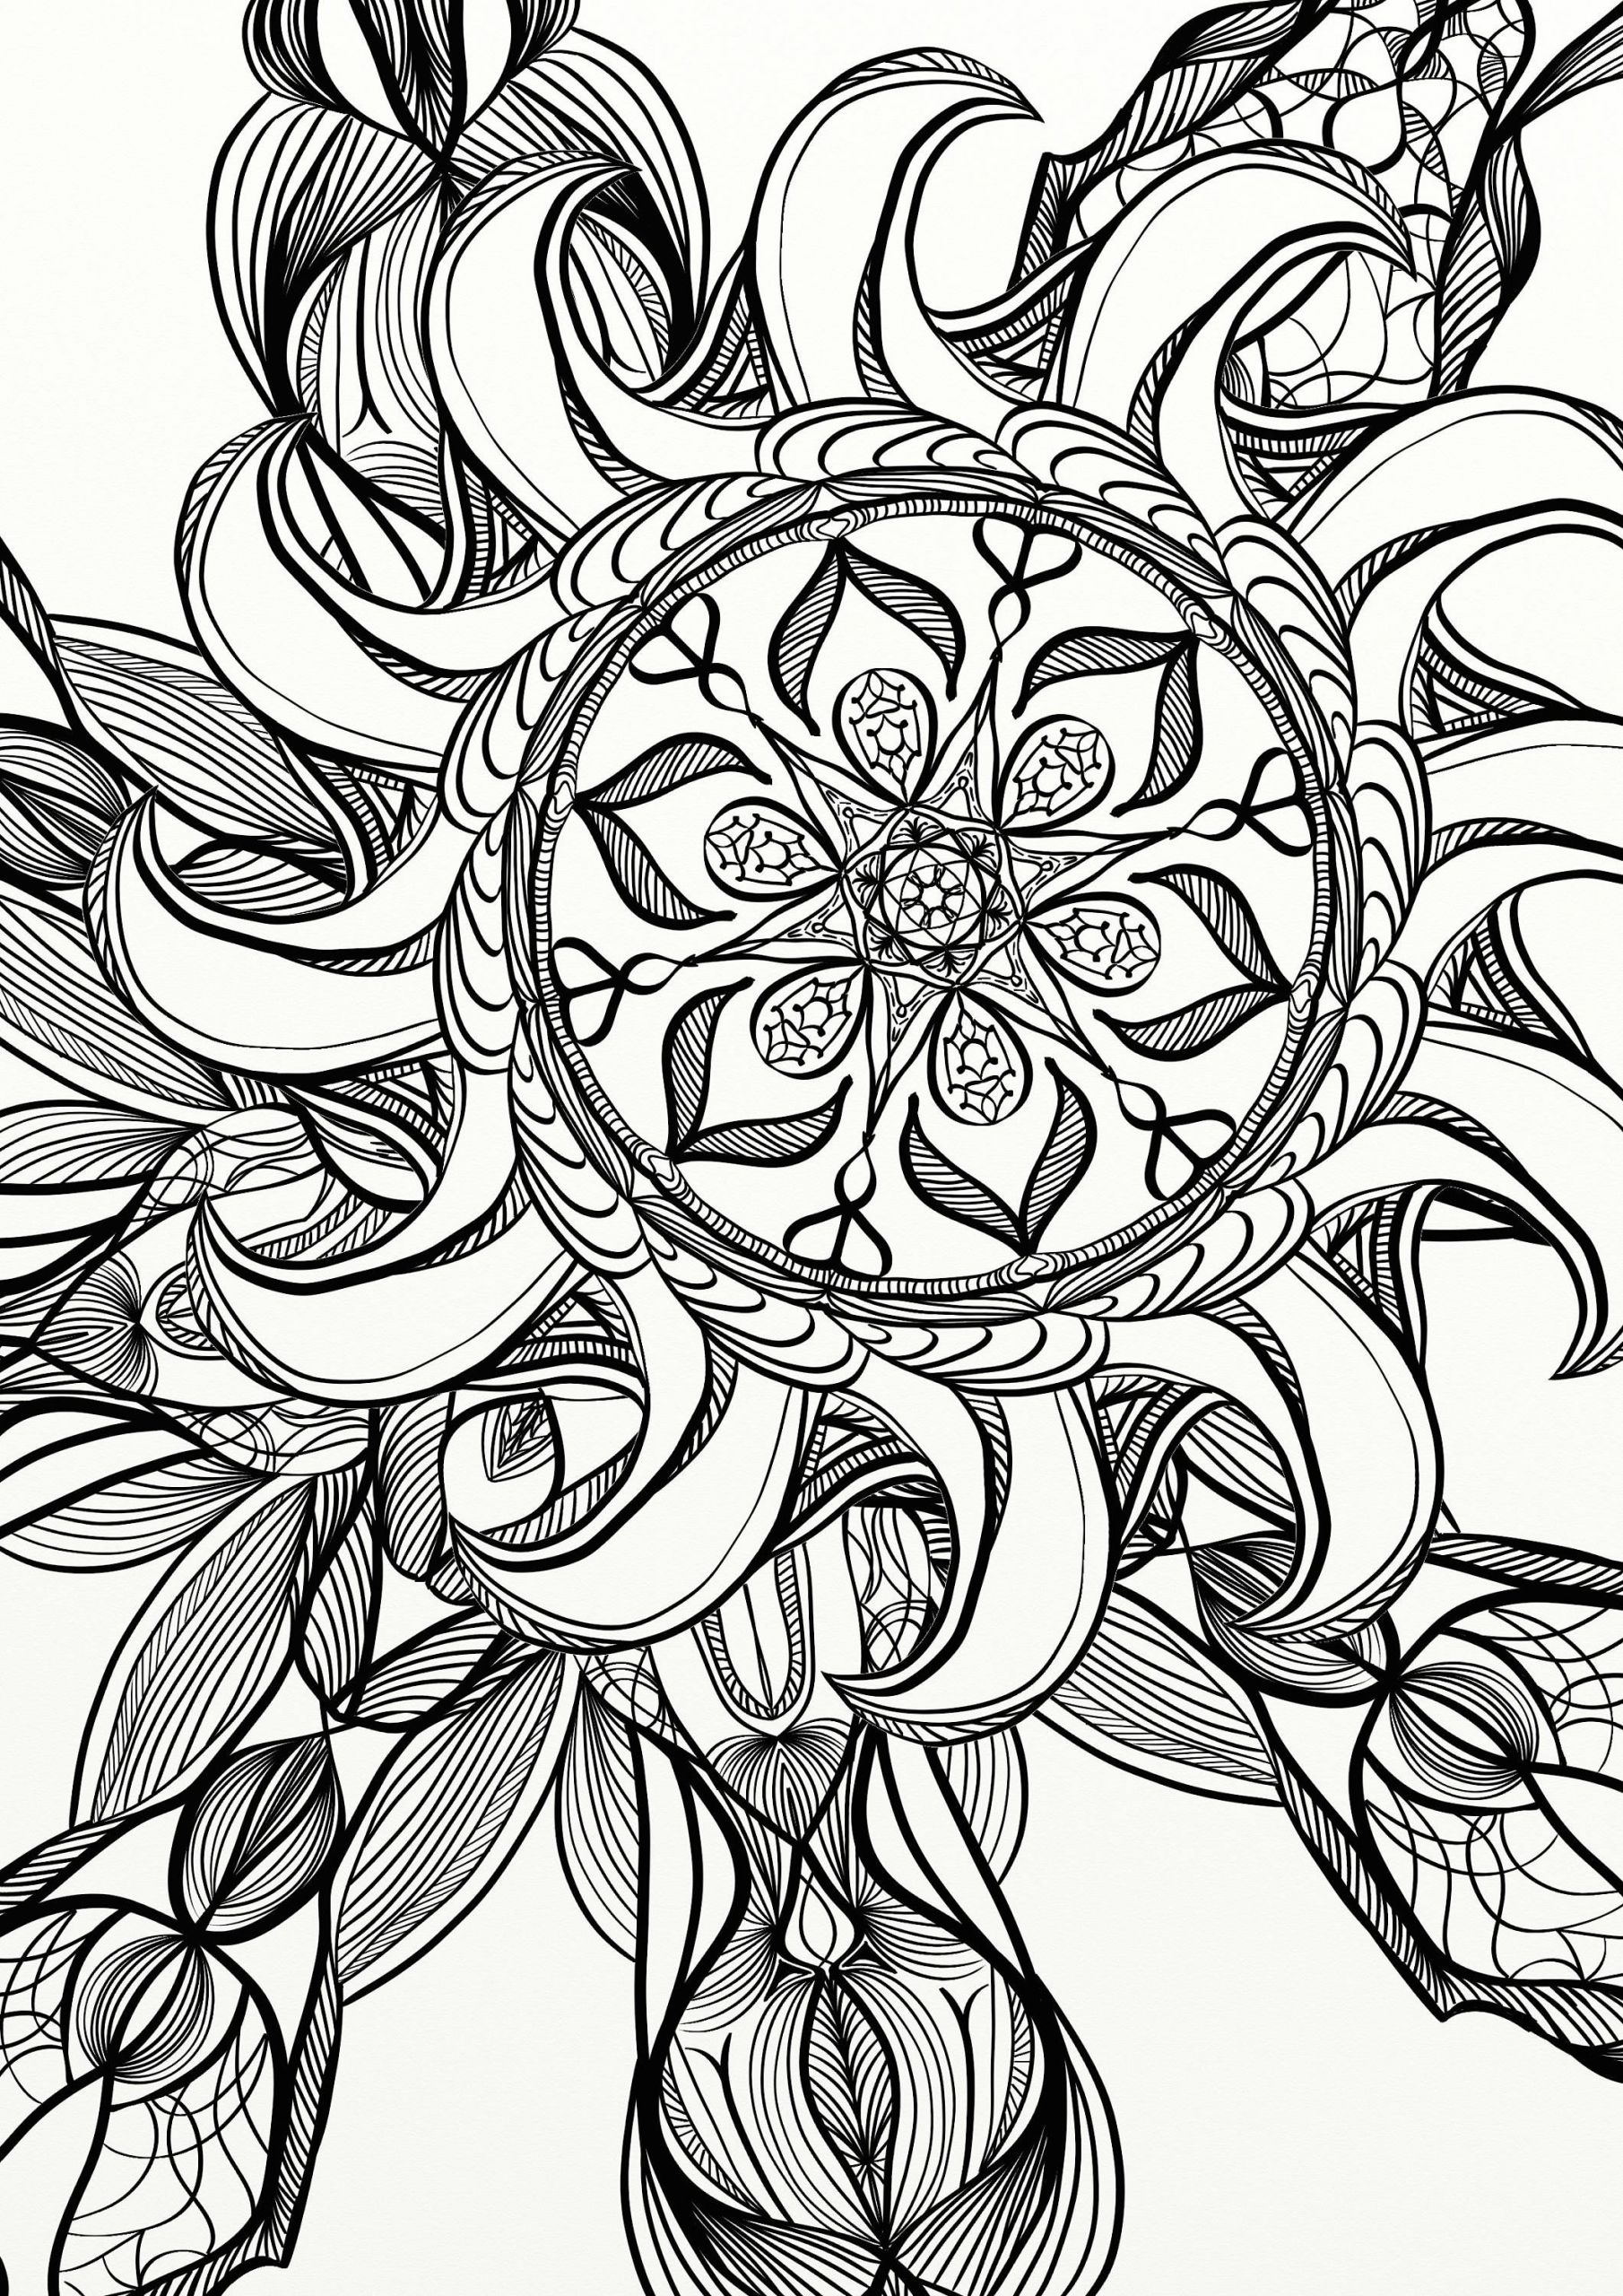 Coloring Sheet For Adults
 Mandala Spiral Relaxing Adult Coloring Page